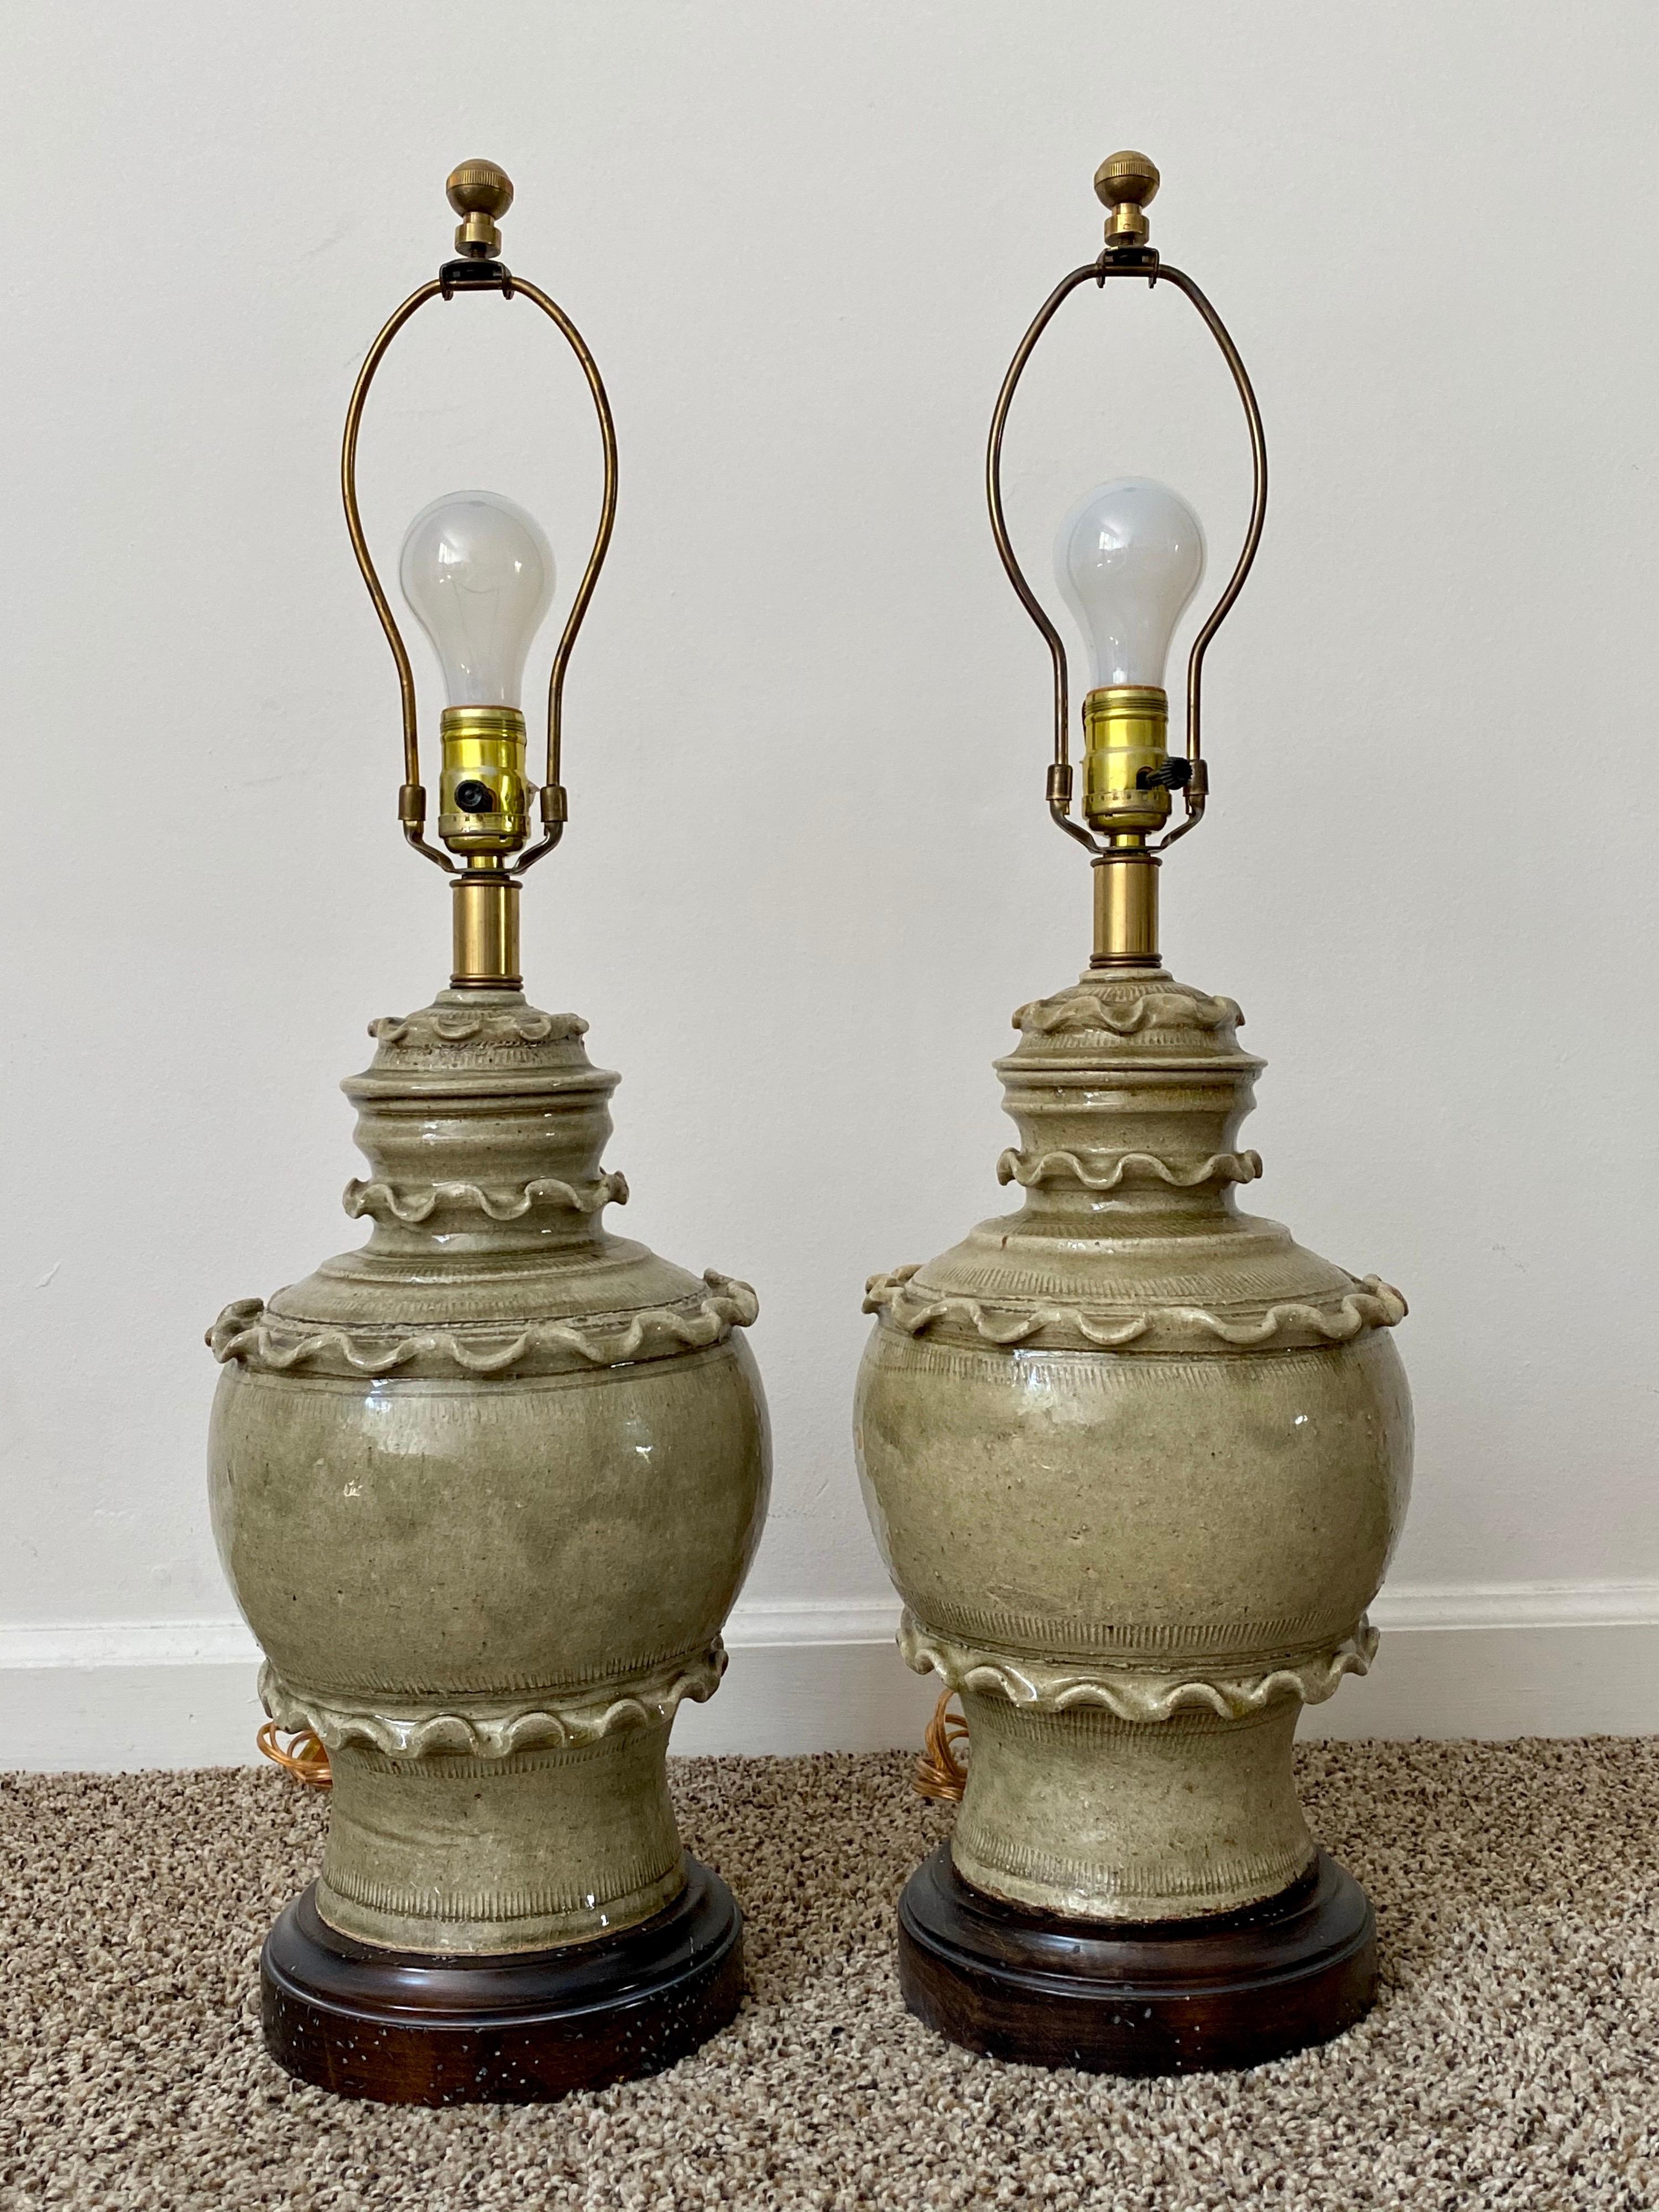 Pair of glazed celadon ceramic lamps by Frederick Cooper. Very little wear by age. Overall height 28”, height to the top of the ceramic body 16”. Shades not included.